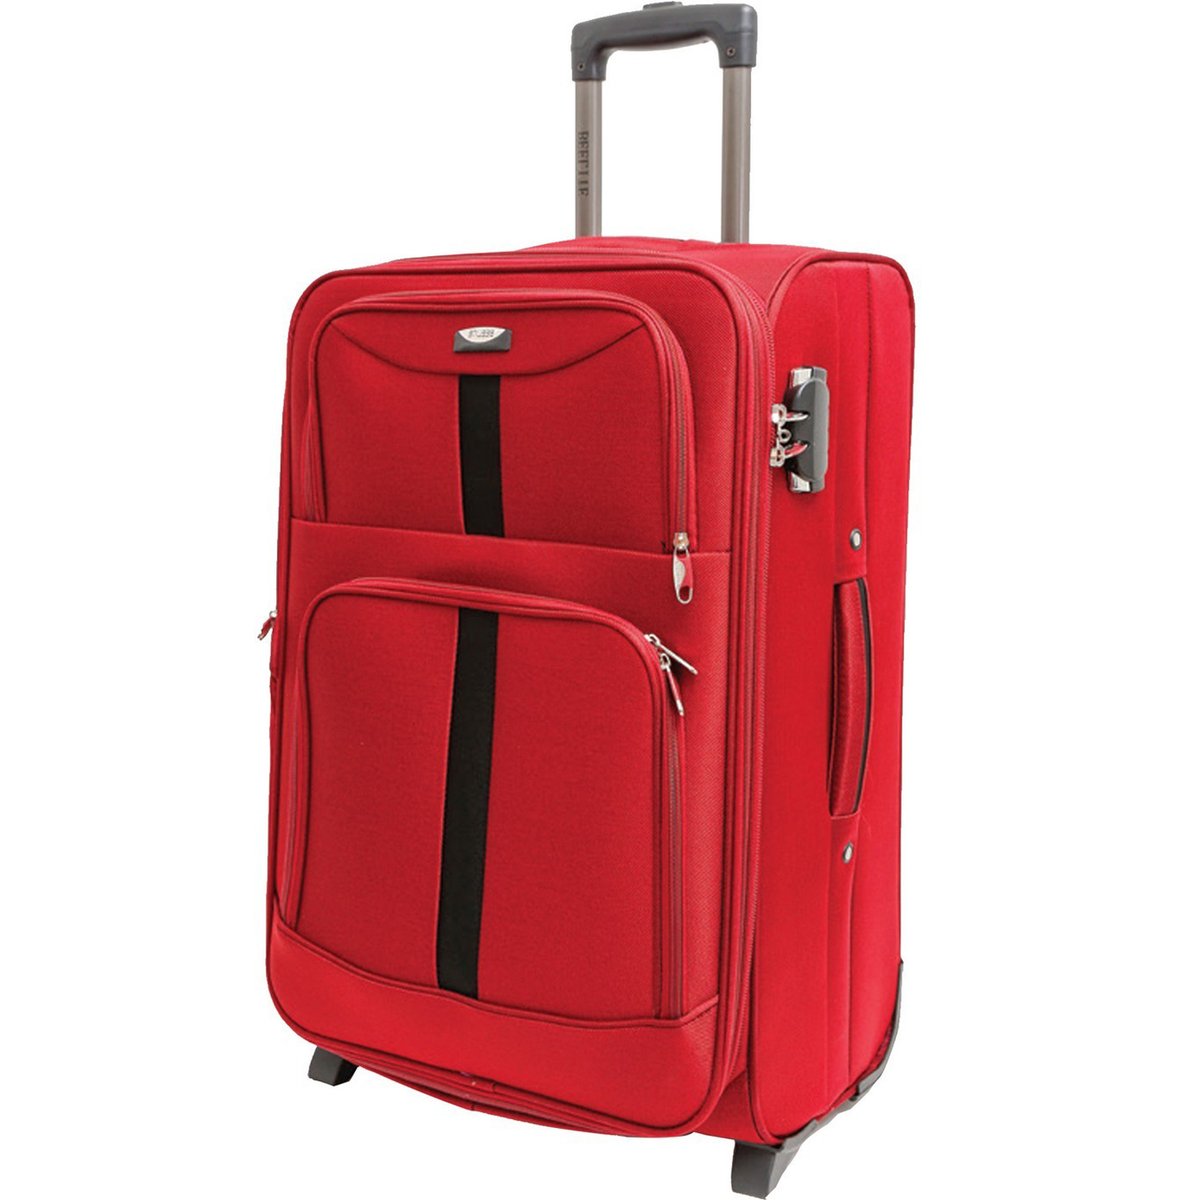 Beelite 2 Wheel Soft Trolley with Cover, 20 inches